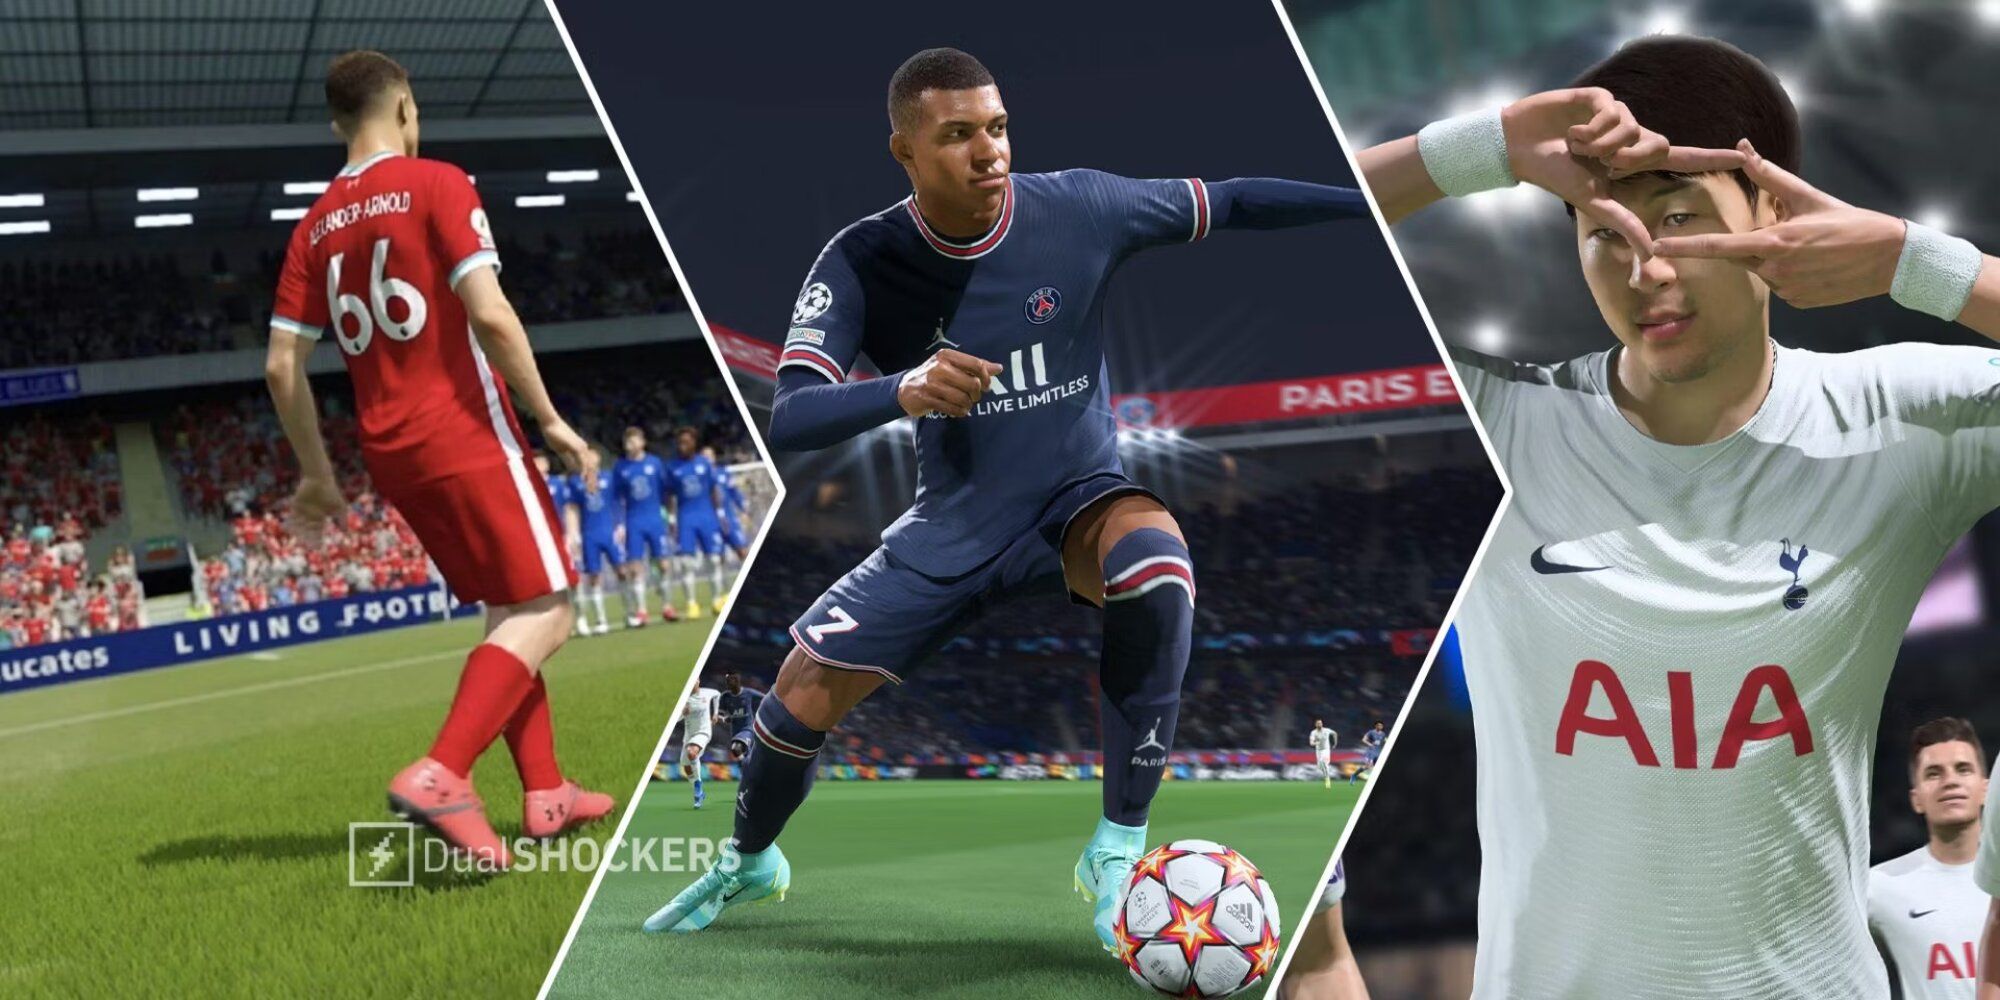 FIFA 23 players Alexander Arnold, Mpappe and Tottenham's Son